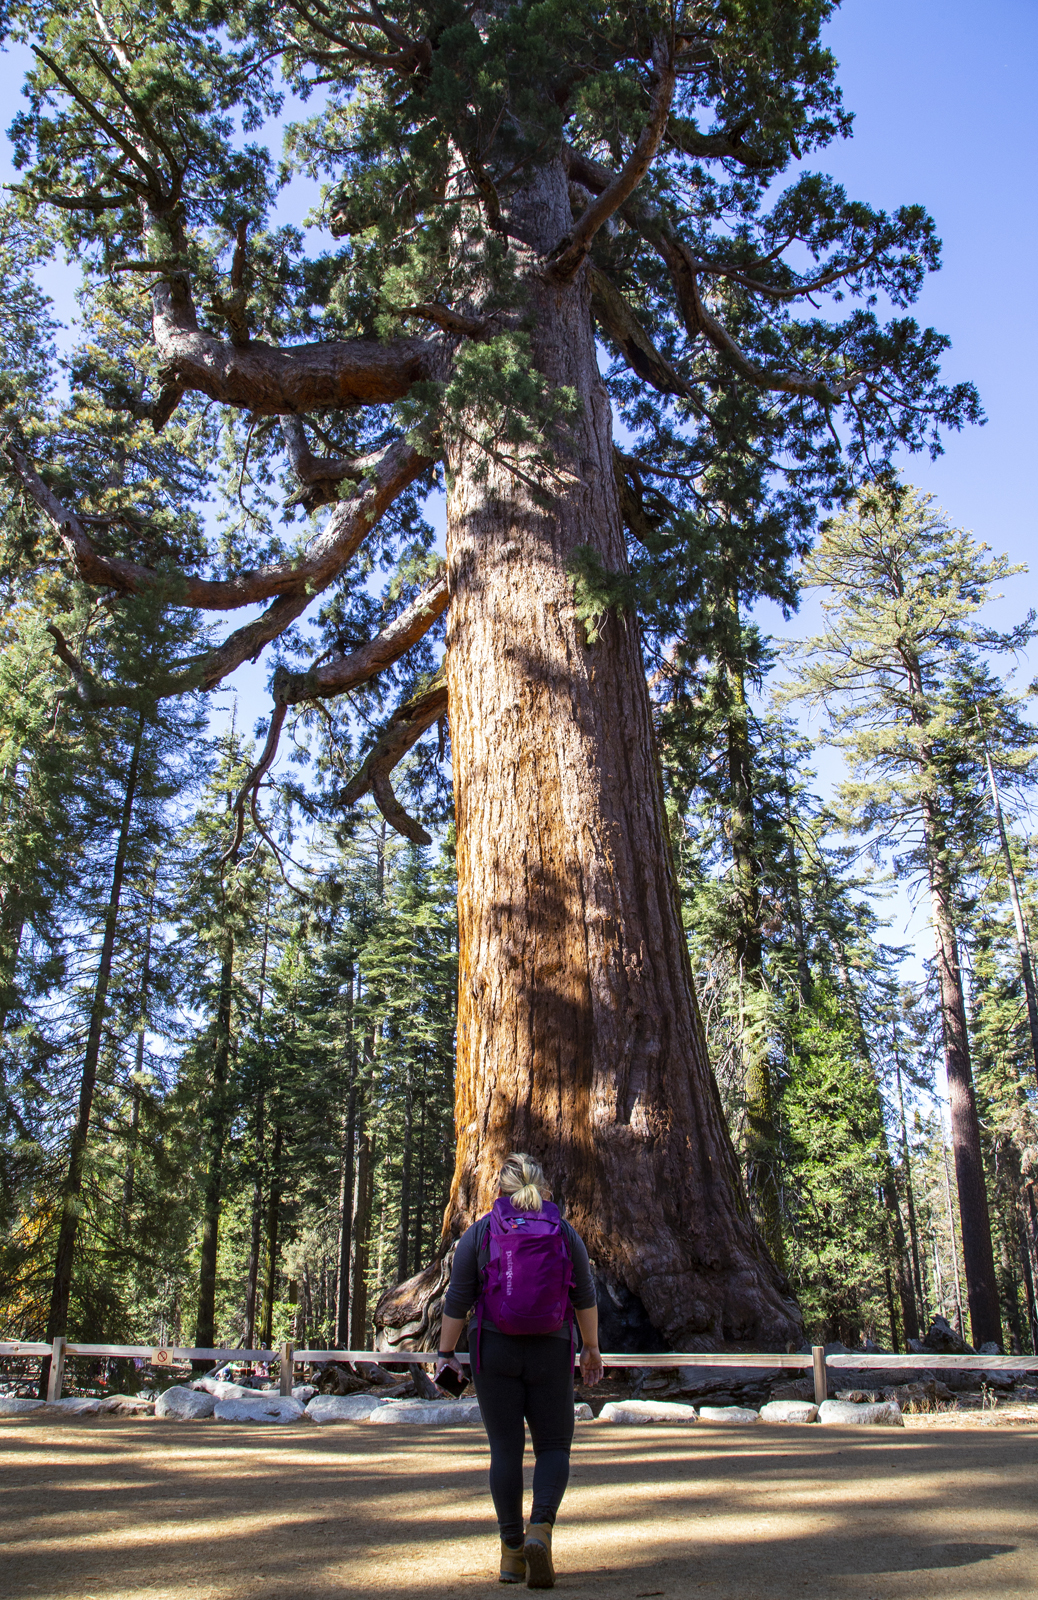  A hiker looking at the Grizzly Giant, Mariposa Grove, Yosemite National Park 